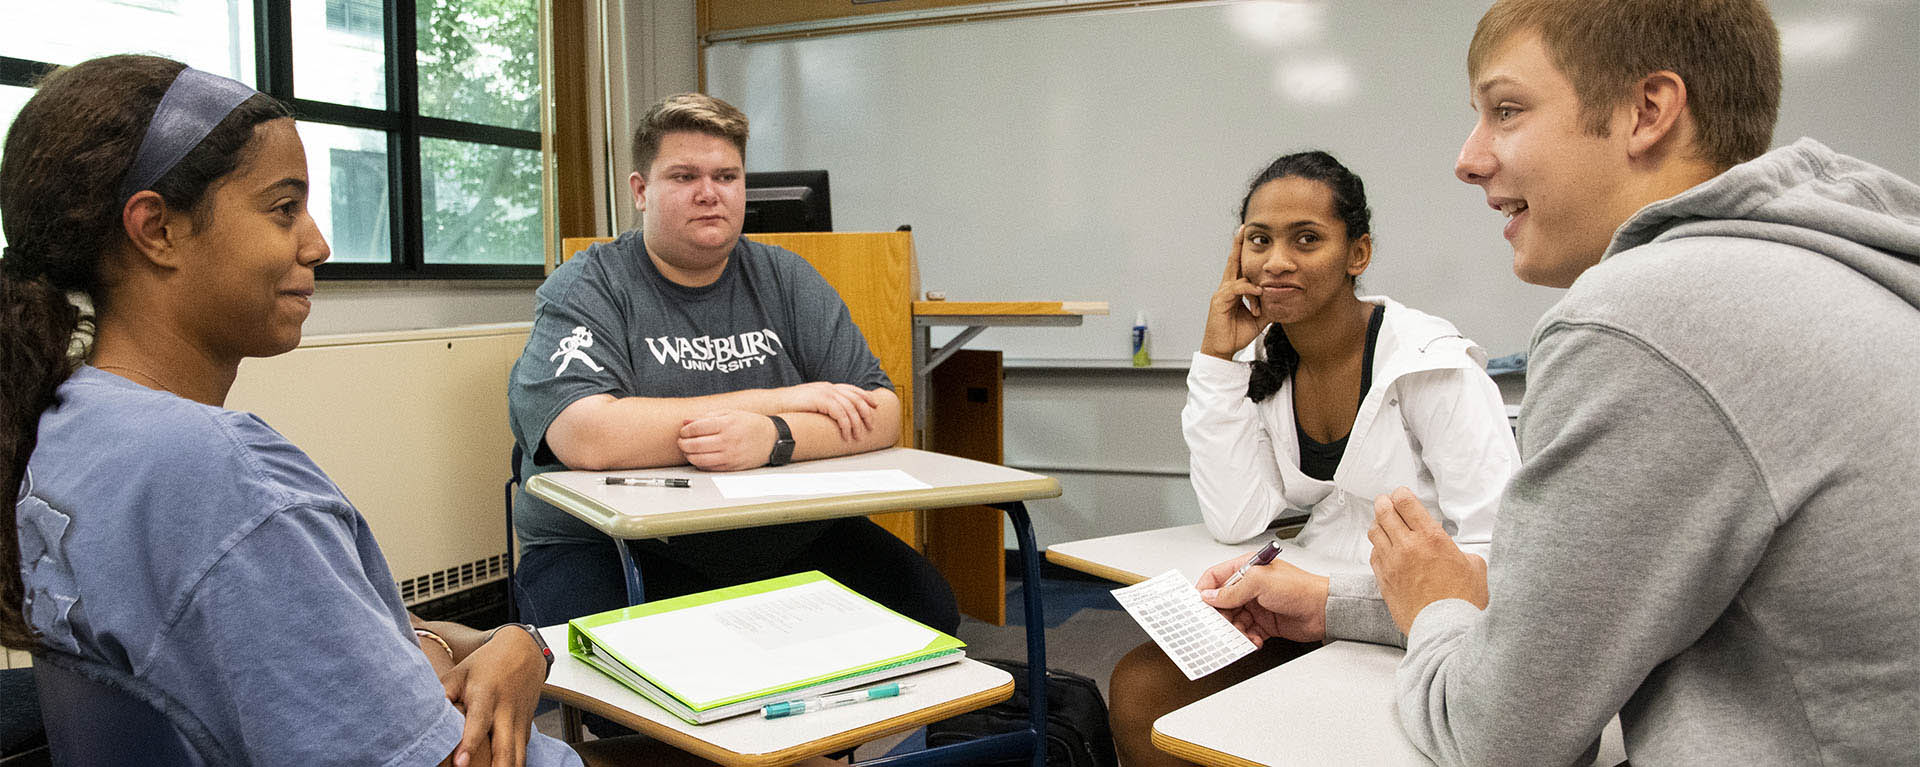 Students talk during a class discussion